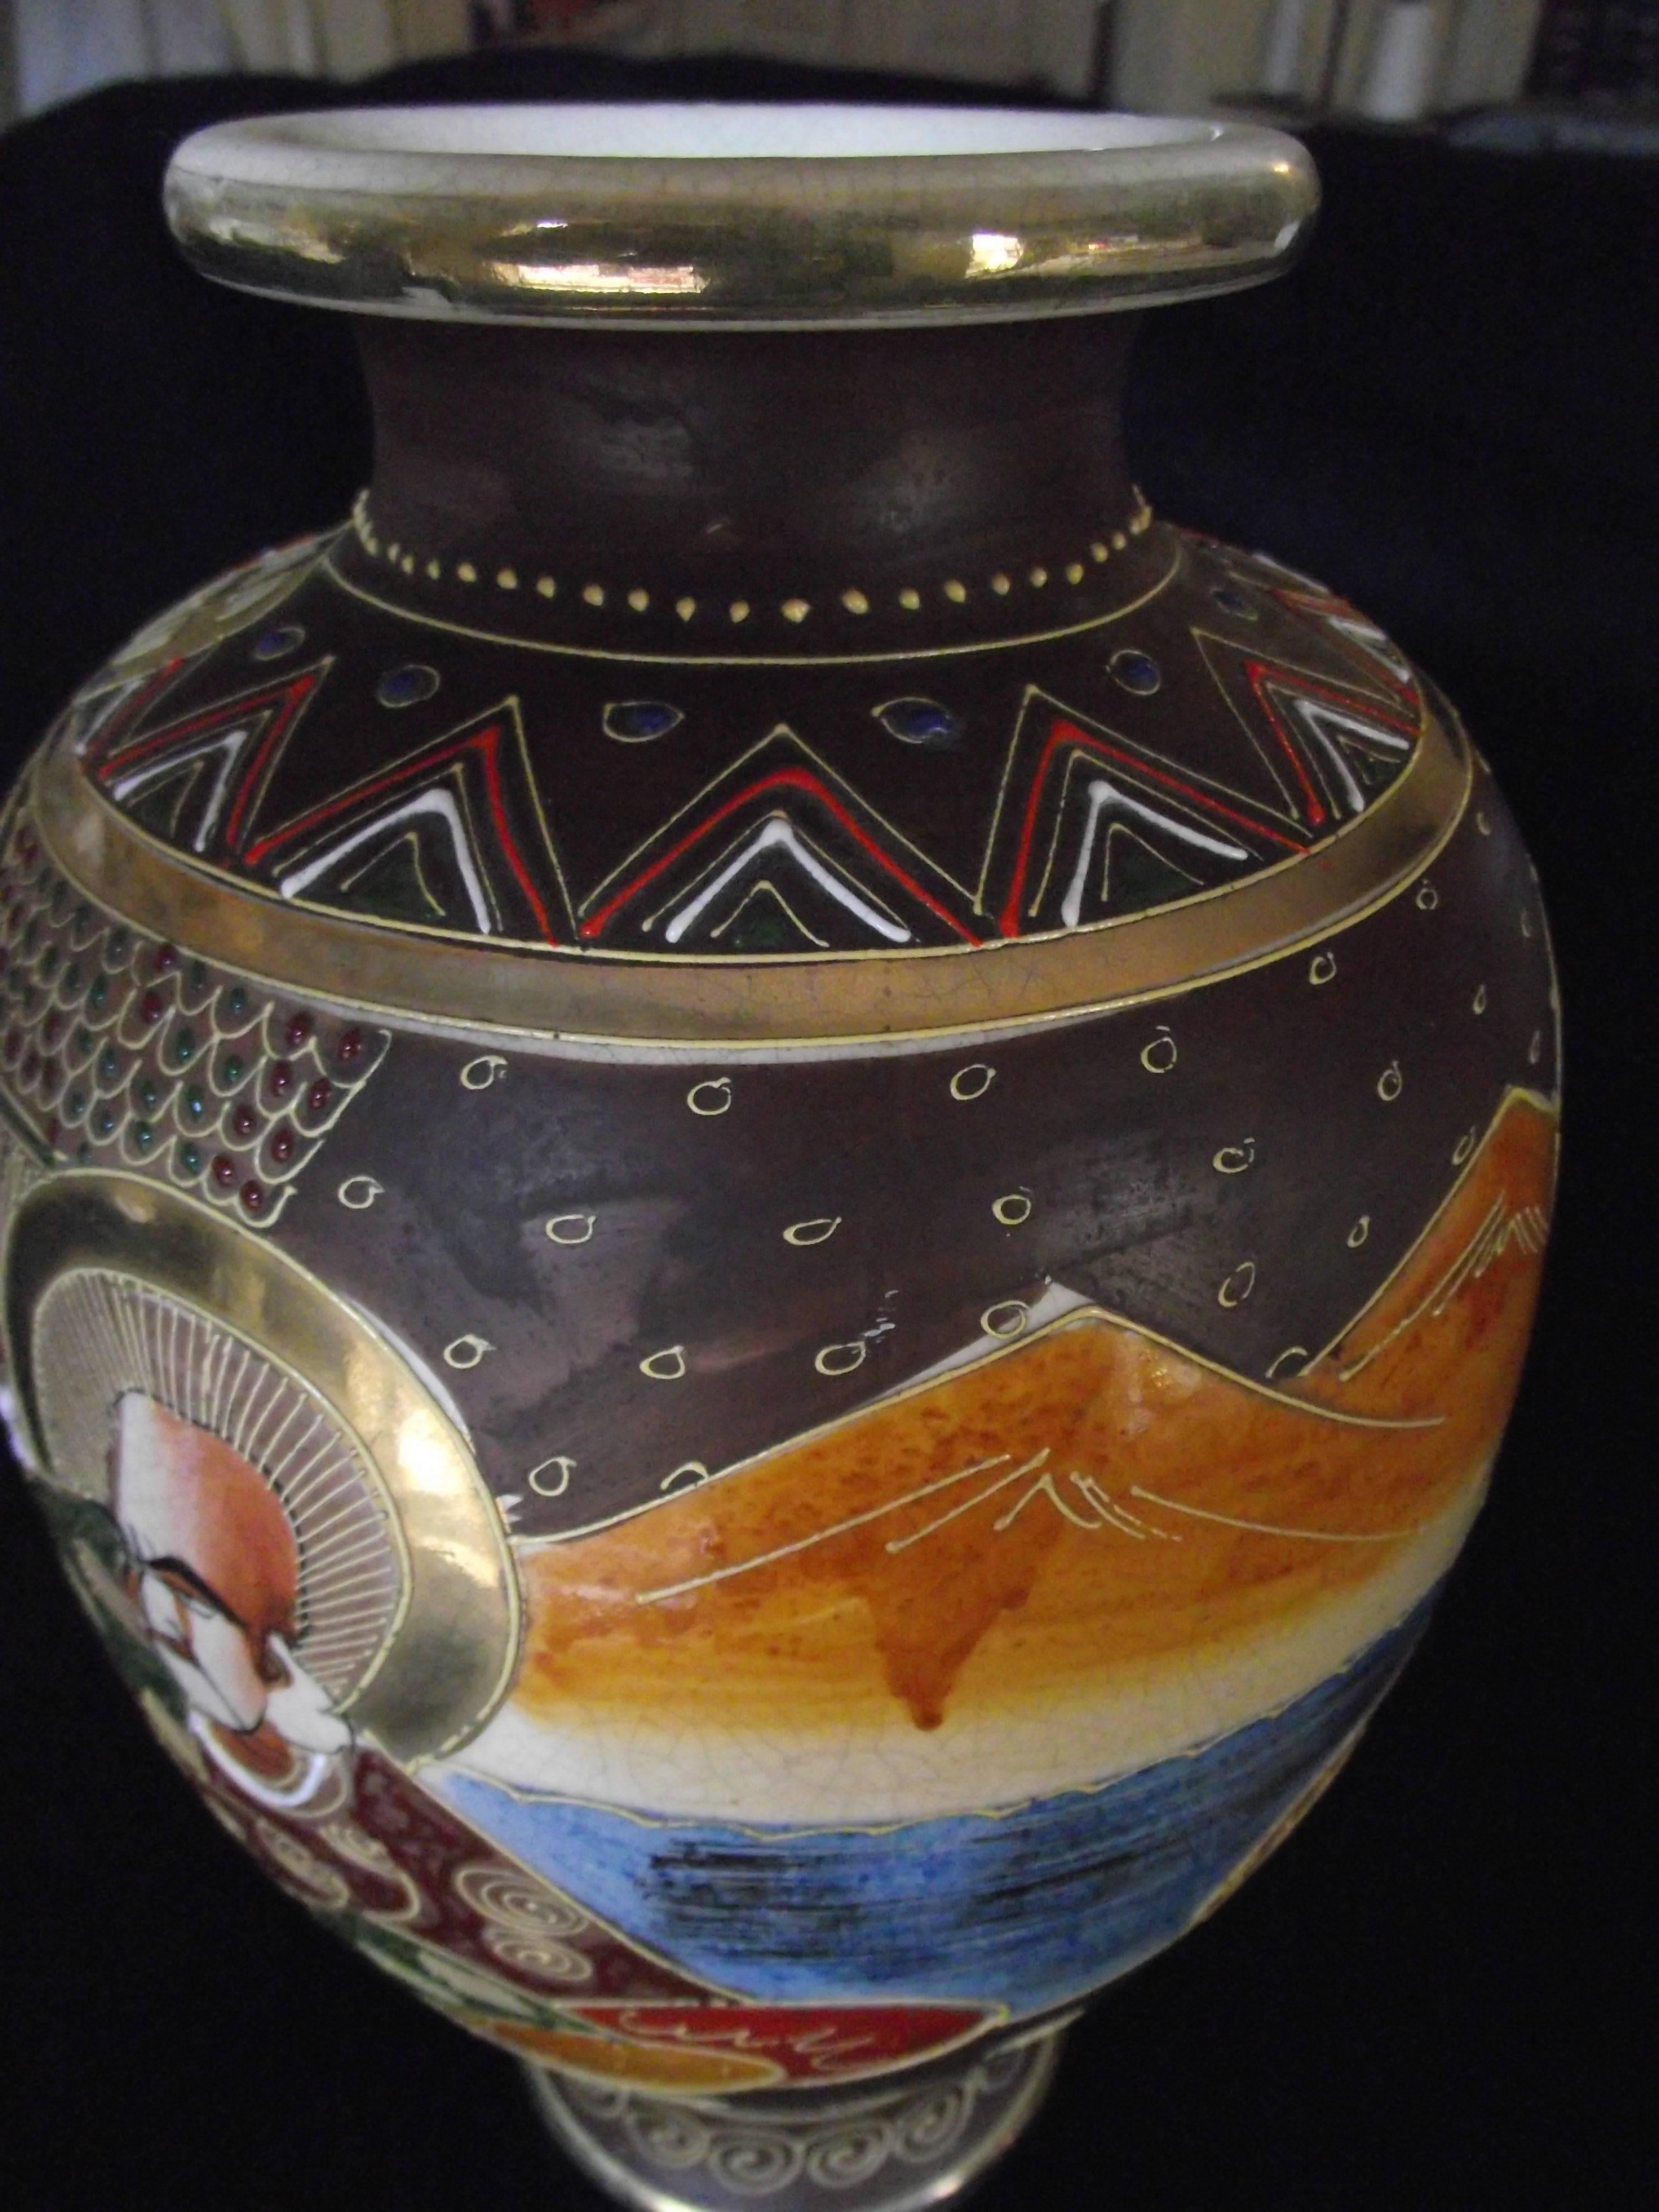 This large beautiful Satsuma vase bears the Satsuma mark as seen just above the woman's head in the first picture.

This vase is in remarkably good condition.

As you can see in the pictures there is no gold loss.

This vase is as close to